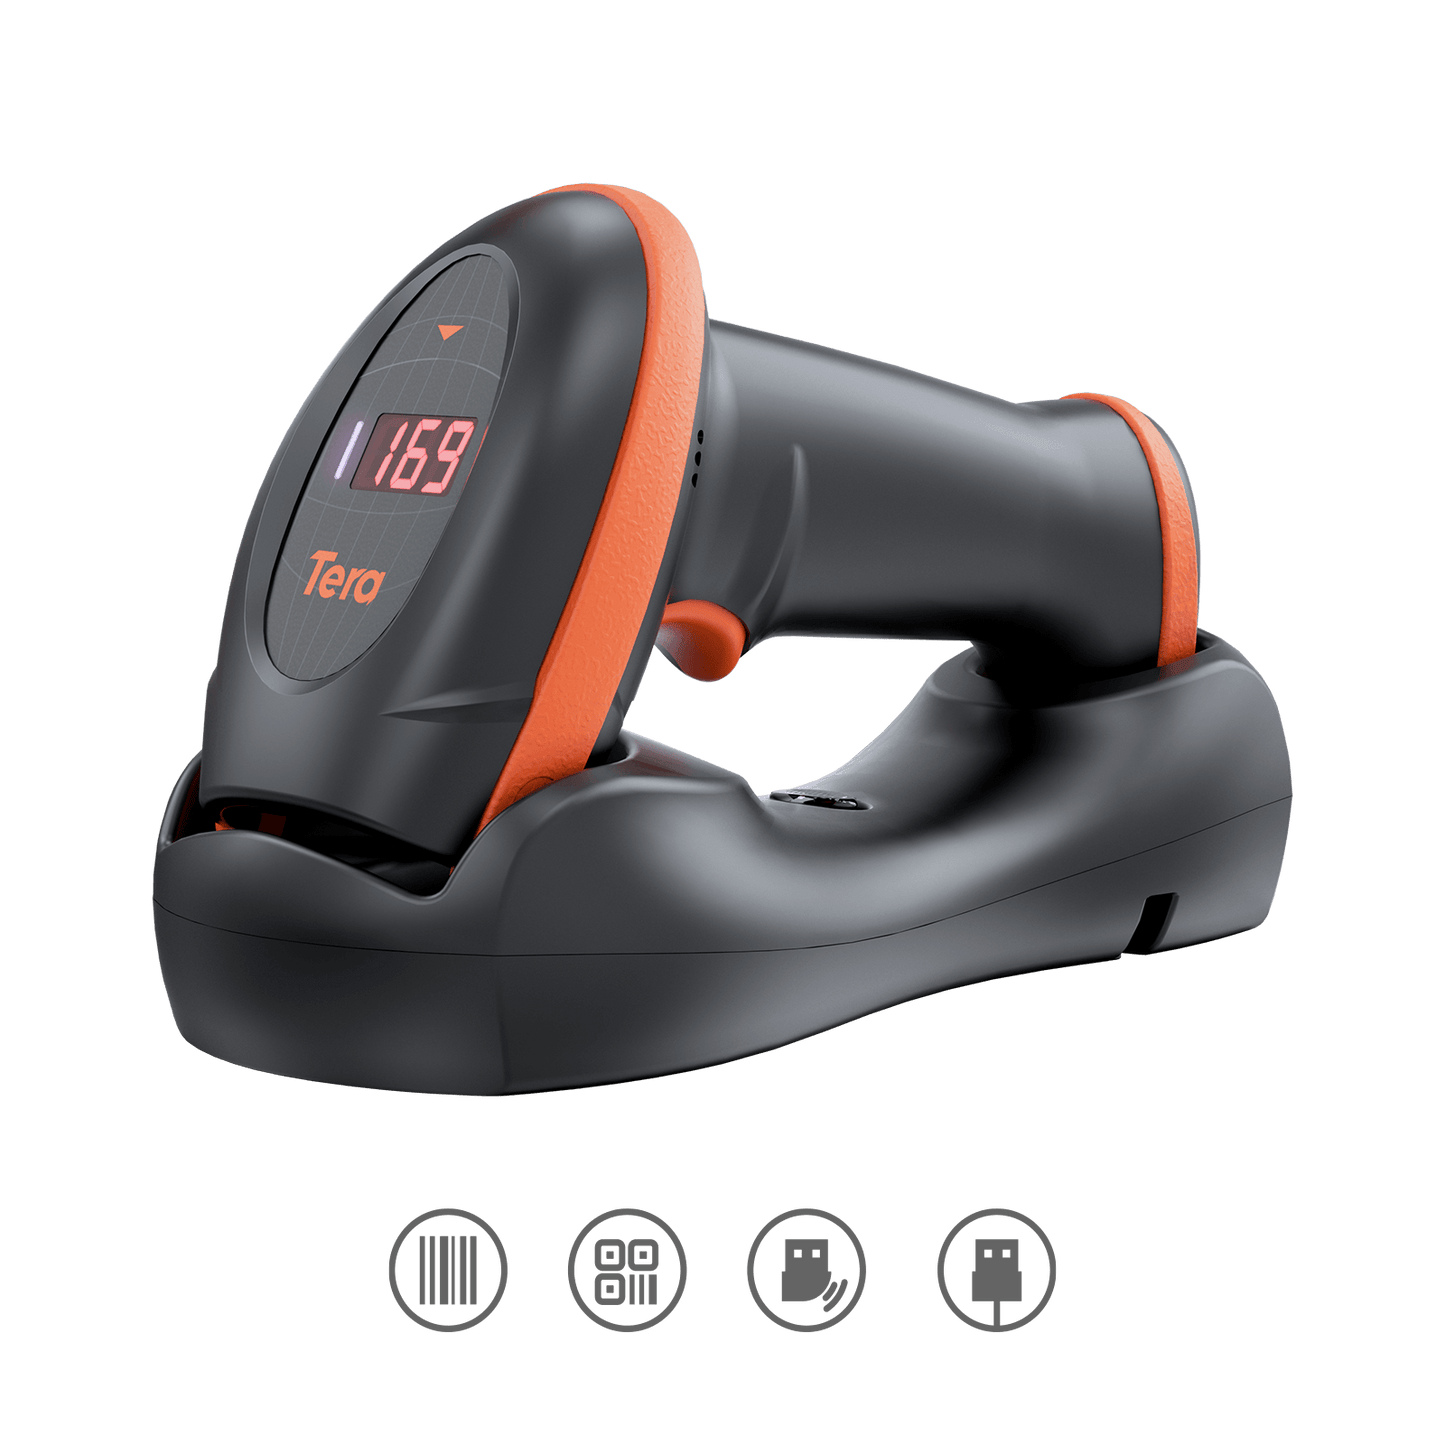 HW0008 2D Wireless Barcode Scanner with Cradle